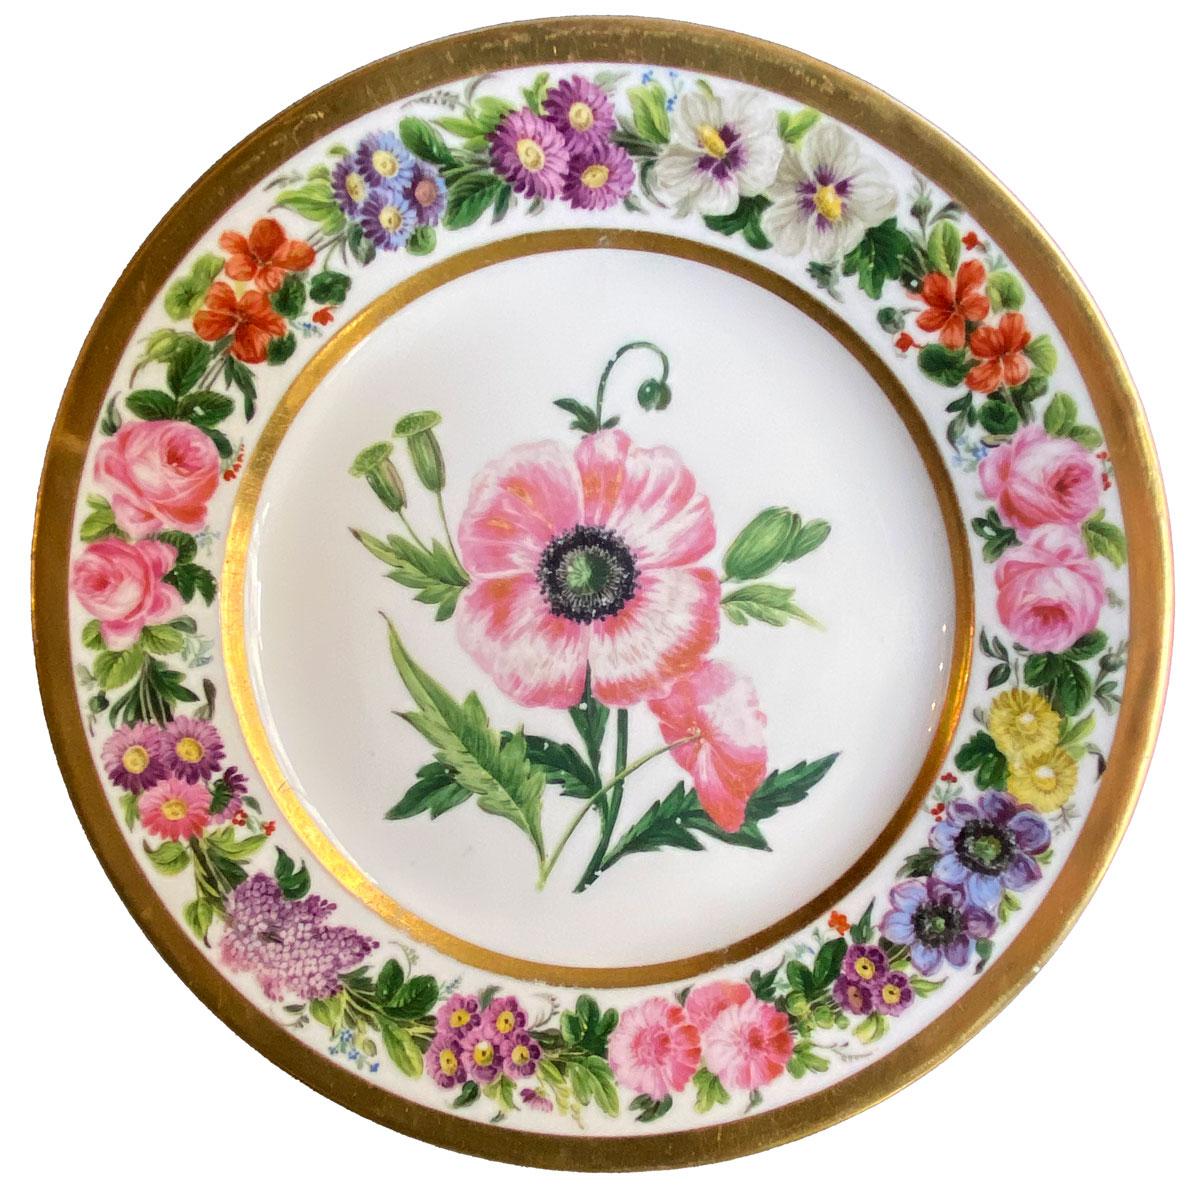 French Set of 6 Early 19th Century Flower Plates by Denuelle - Vieux Paris 